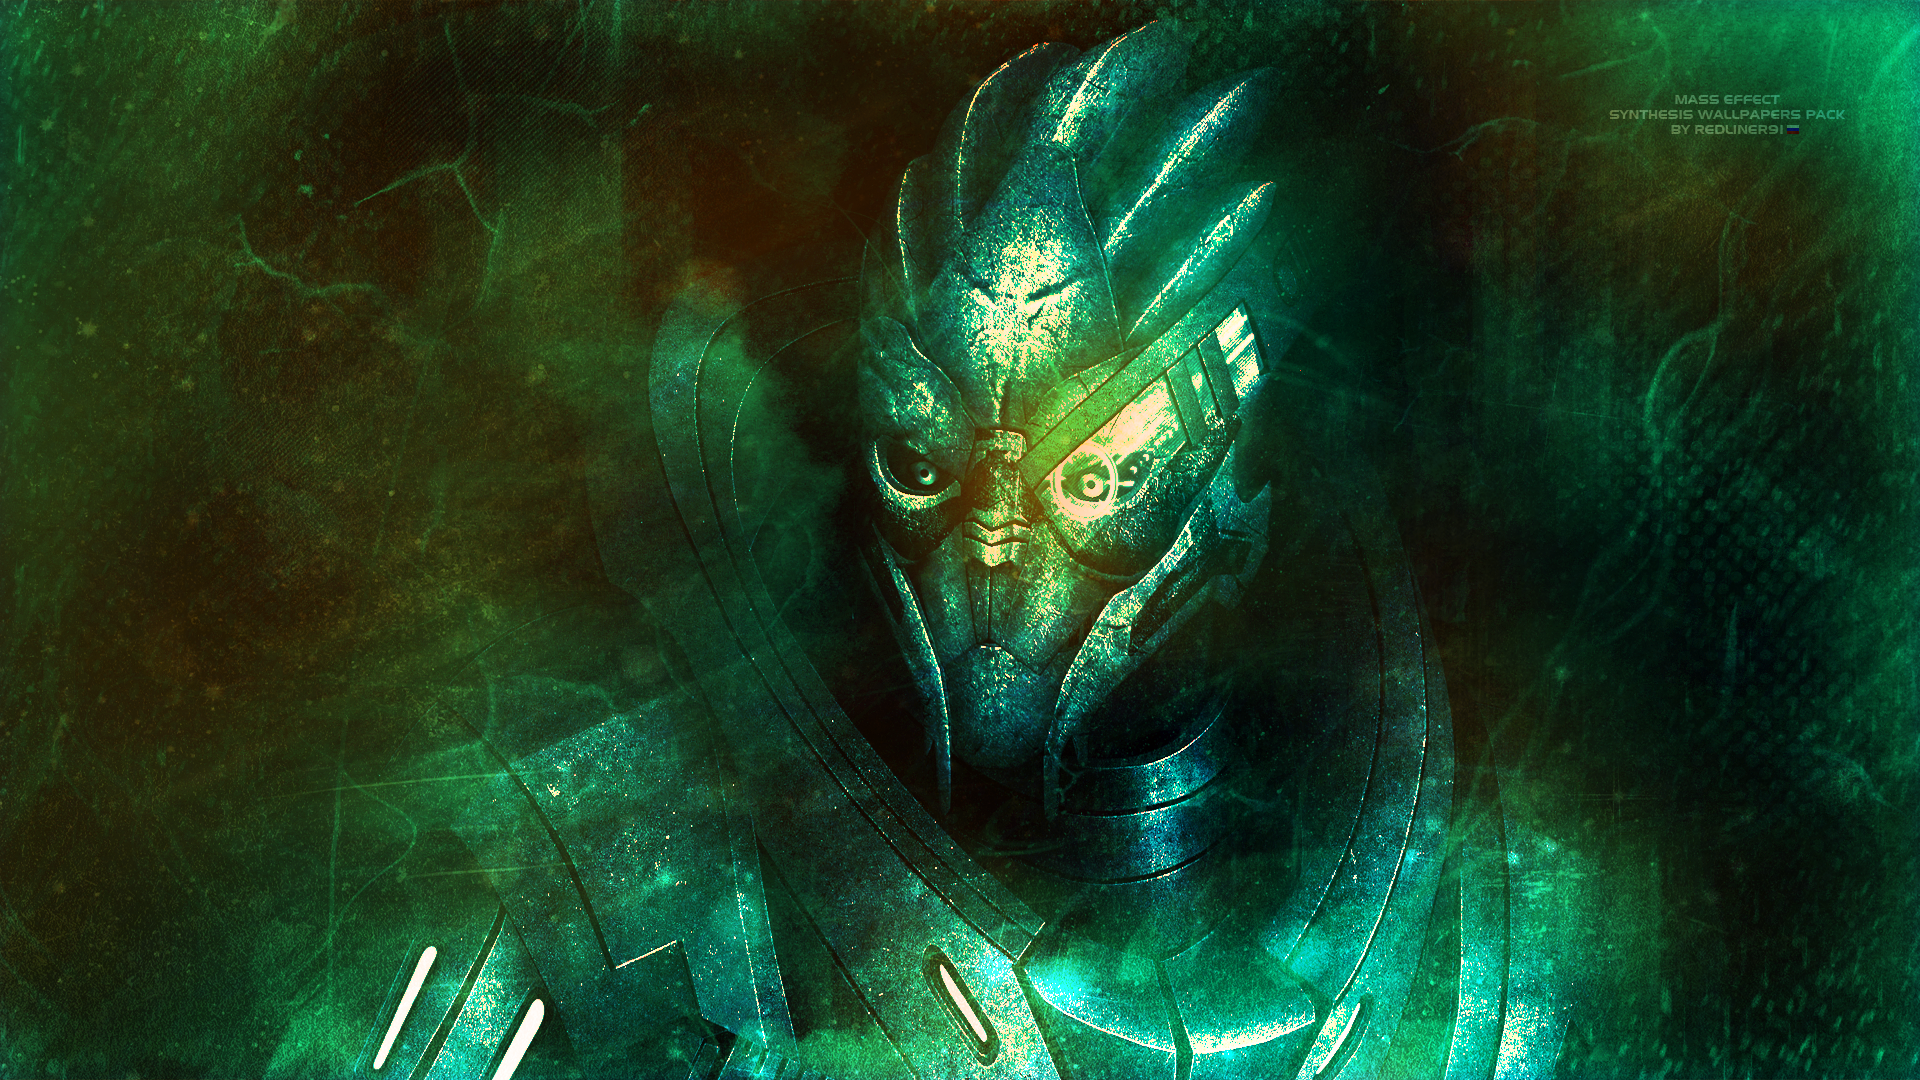 mass_effect_synthesis_wallpapers_garrus__2014__by_redliner91-d7a8tof.png